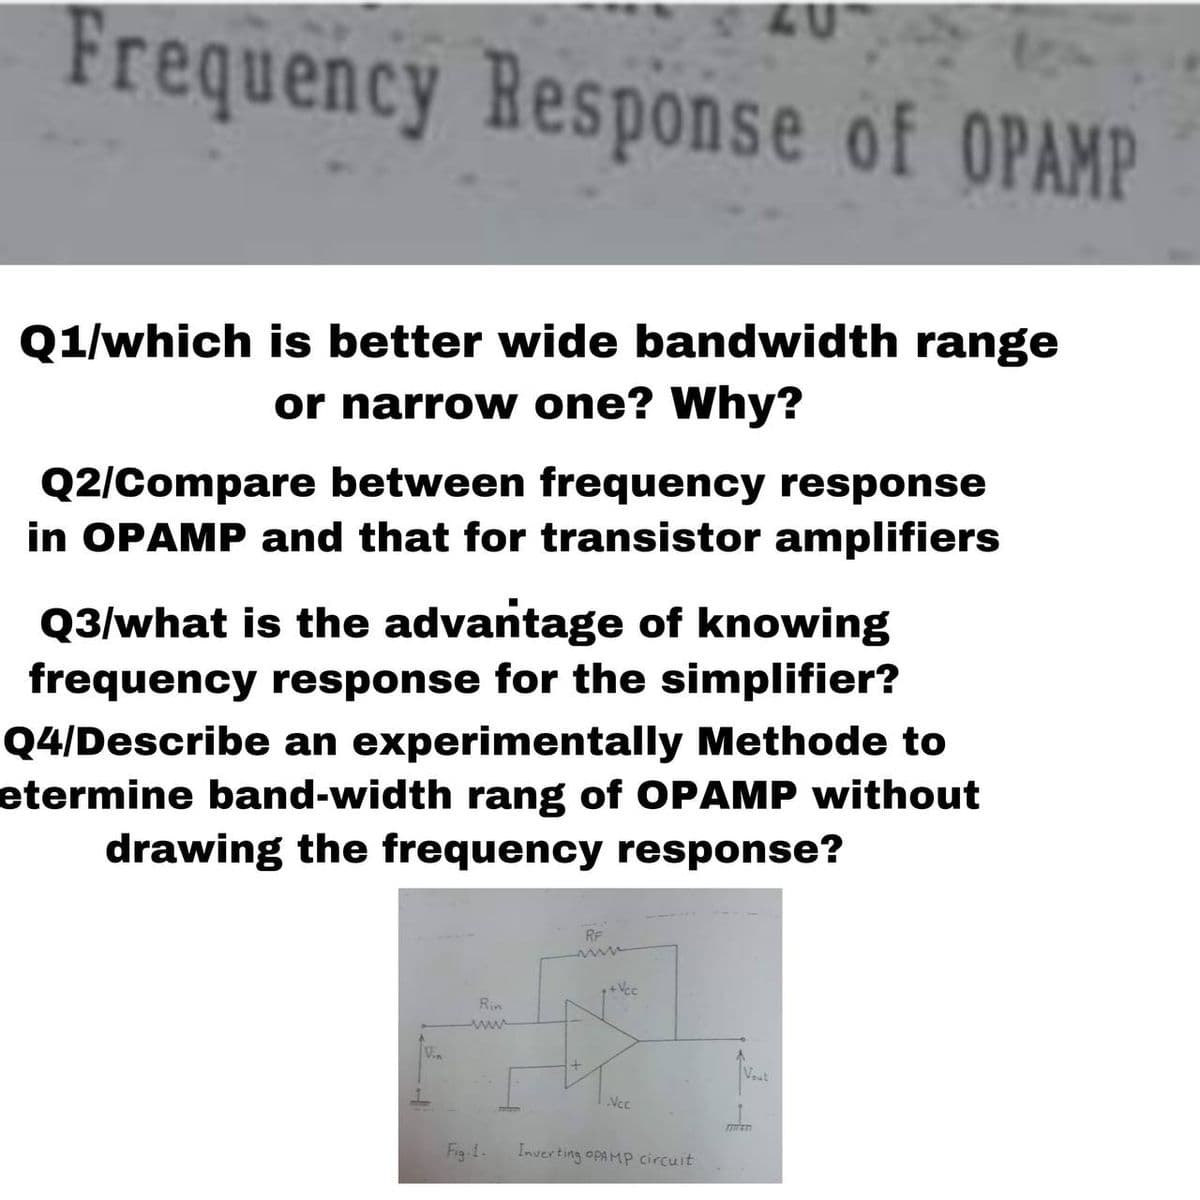 Frequency Response of OPAMP
Q1/which is better wide bandwidth range
or narrow one? Why?
Q2/Compare between frequency response
in OPAMP and that for transistor amplifiers
Q3/what is the advantage of knowing
frequency response for the simplifier?
Q4/Describe an experimentally Methode to
etermine band-width rang of OPAMP without
drawing the frequency response?
RF
+Vec
Rin
Vin
Vout
Ncc
Fig-1.
Inverting OPAMP circuit
